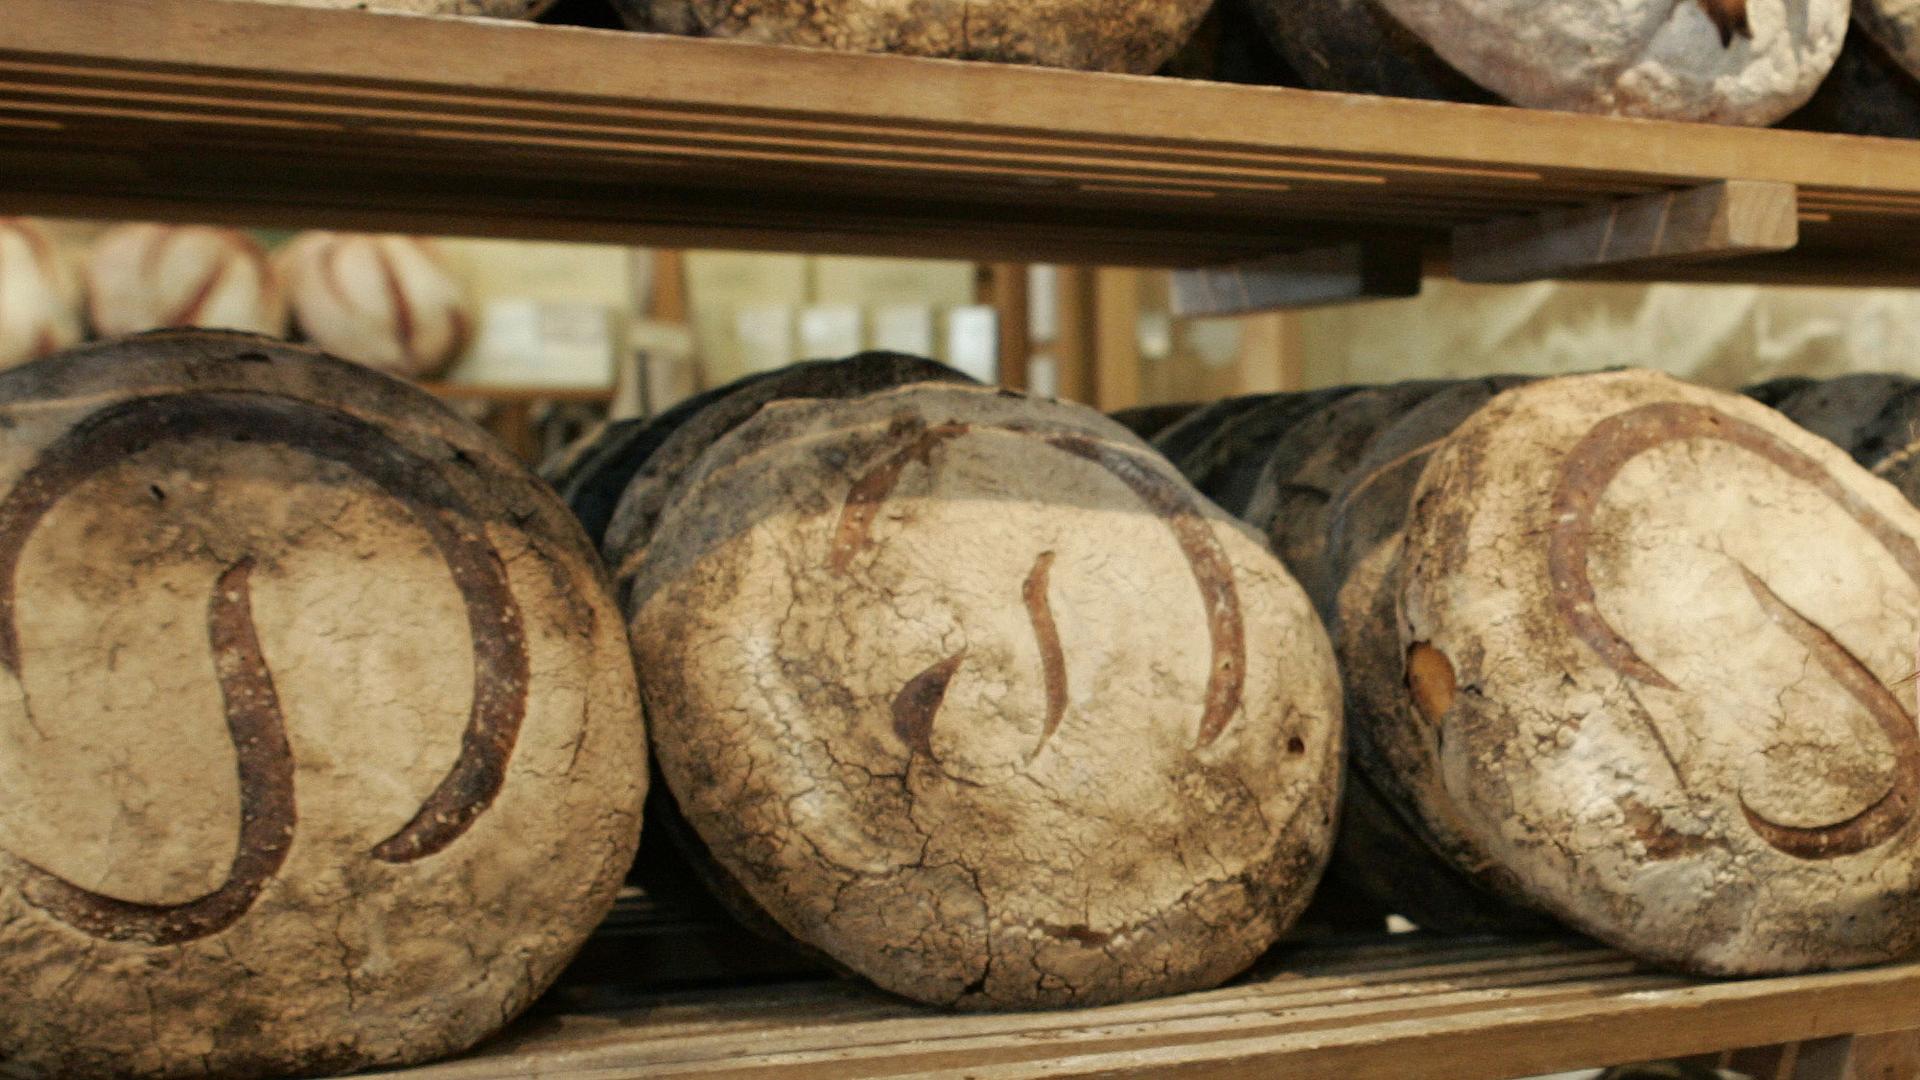 Freshly baked Miche line the walls at the original Poilane family bread bakery in Paris.